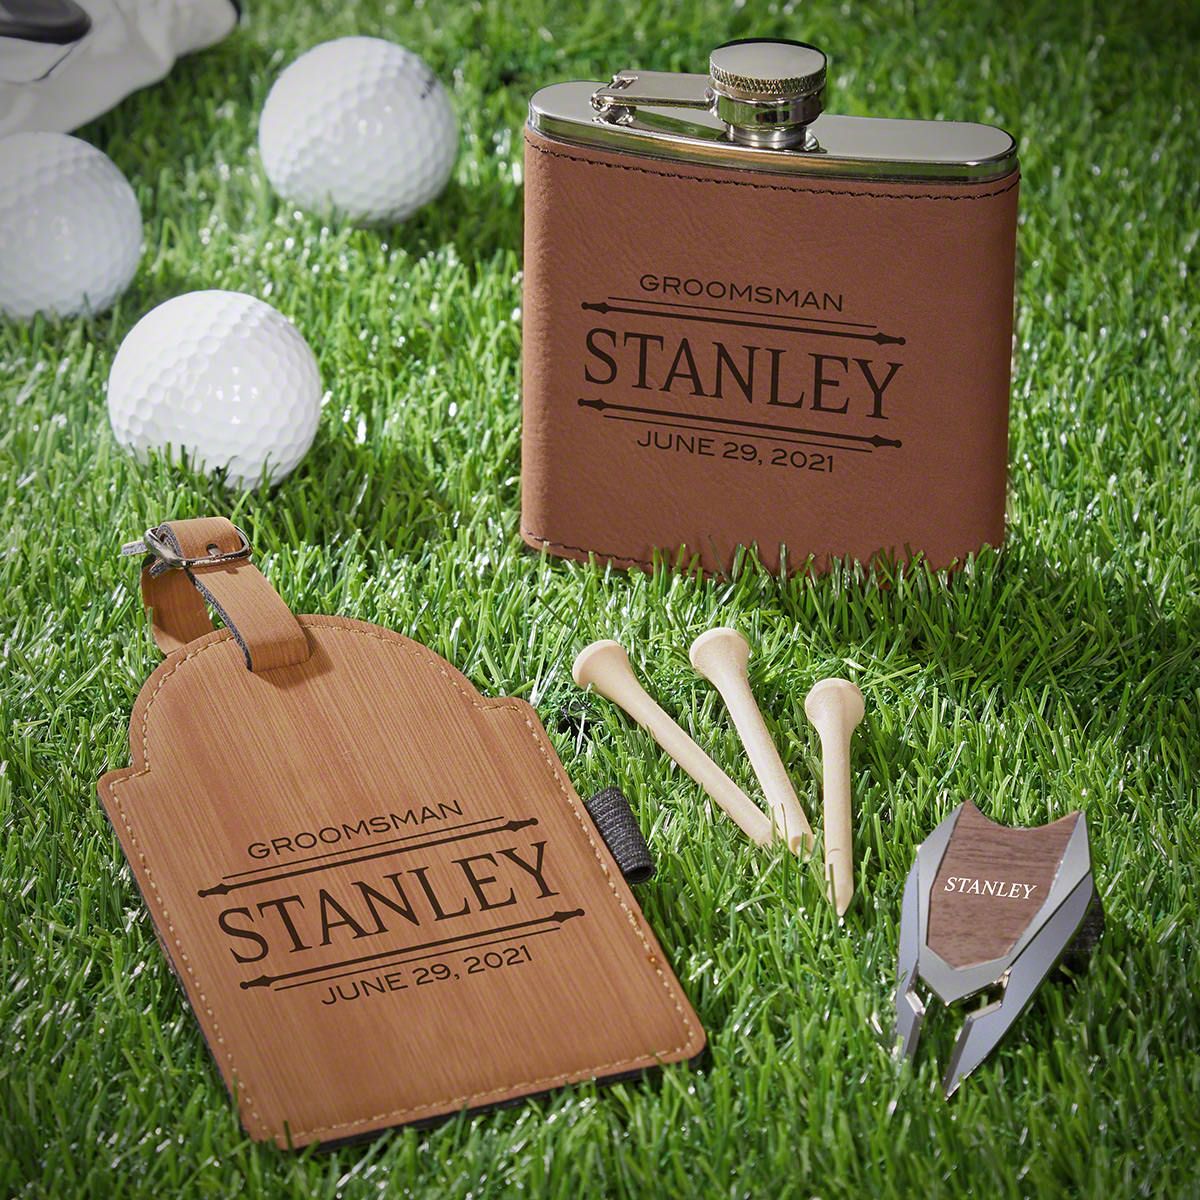 HomeWetBar Stanford Personalized Golf Bag Tag Gift Set with Flask